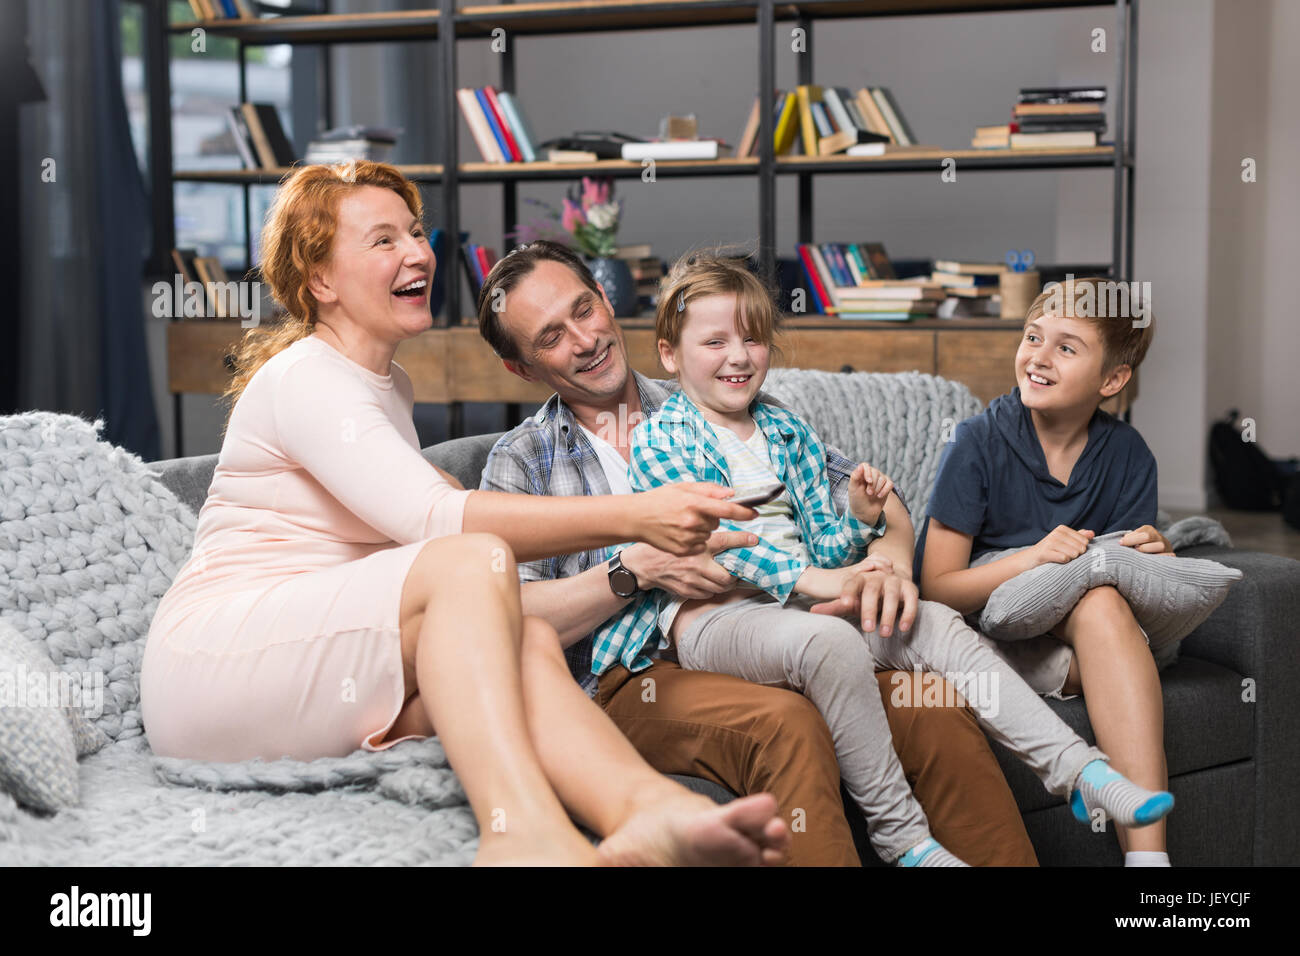 Family Sitting On Couch Watching TV, Happy Smiling Parents Spending Time With Children In Living Room Stock Photo